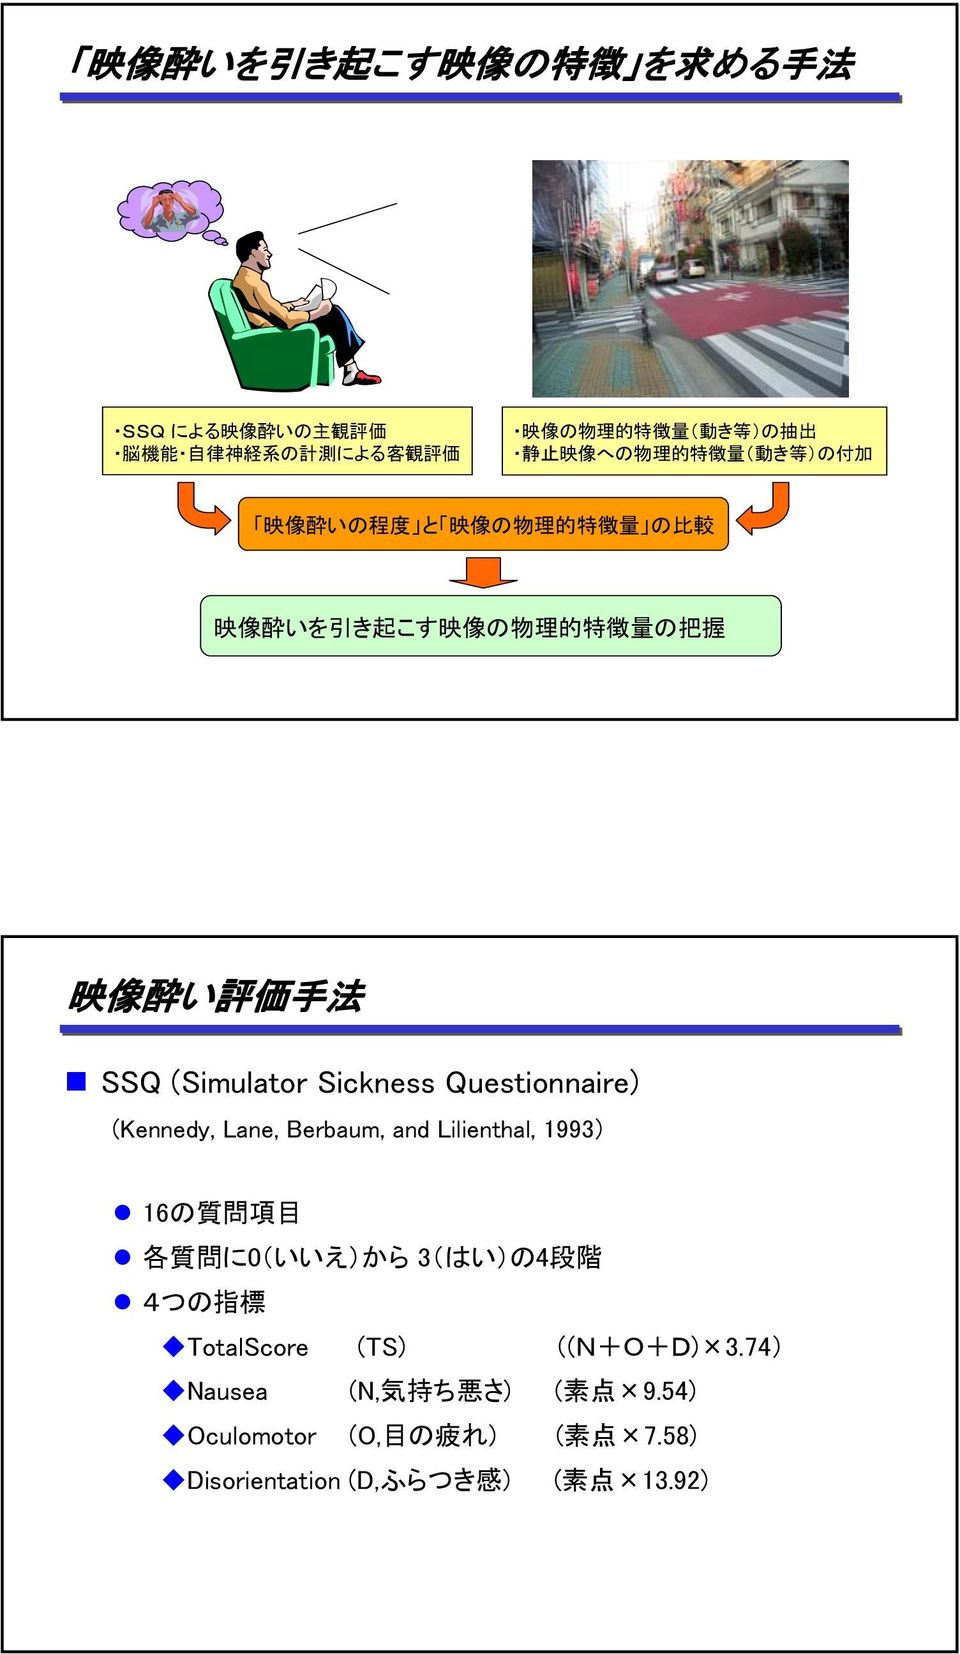 (Simulator Sickness Questionnaire) (Kennedy, Lane, Berbaum, and Lilienthal, 1993) 16の 質 問 項 目 各 質 問 に(いいえ)から 3(はい)の4 段 階 4つの 指 標